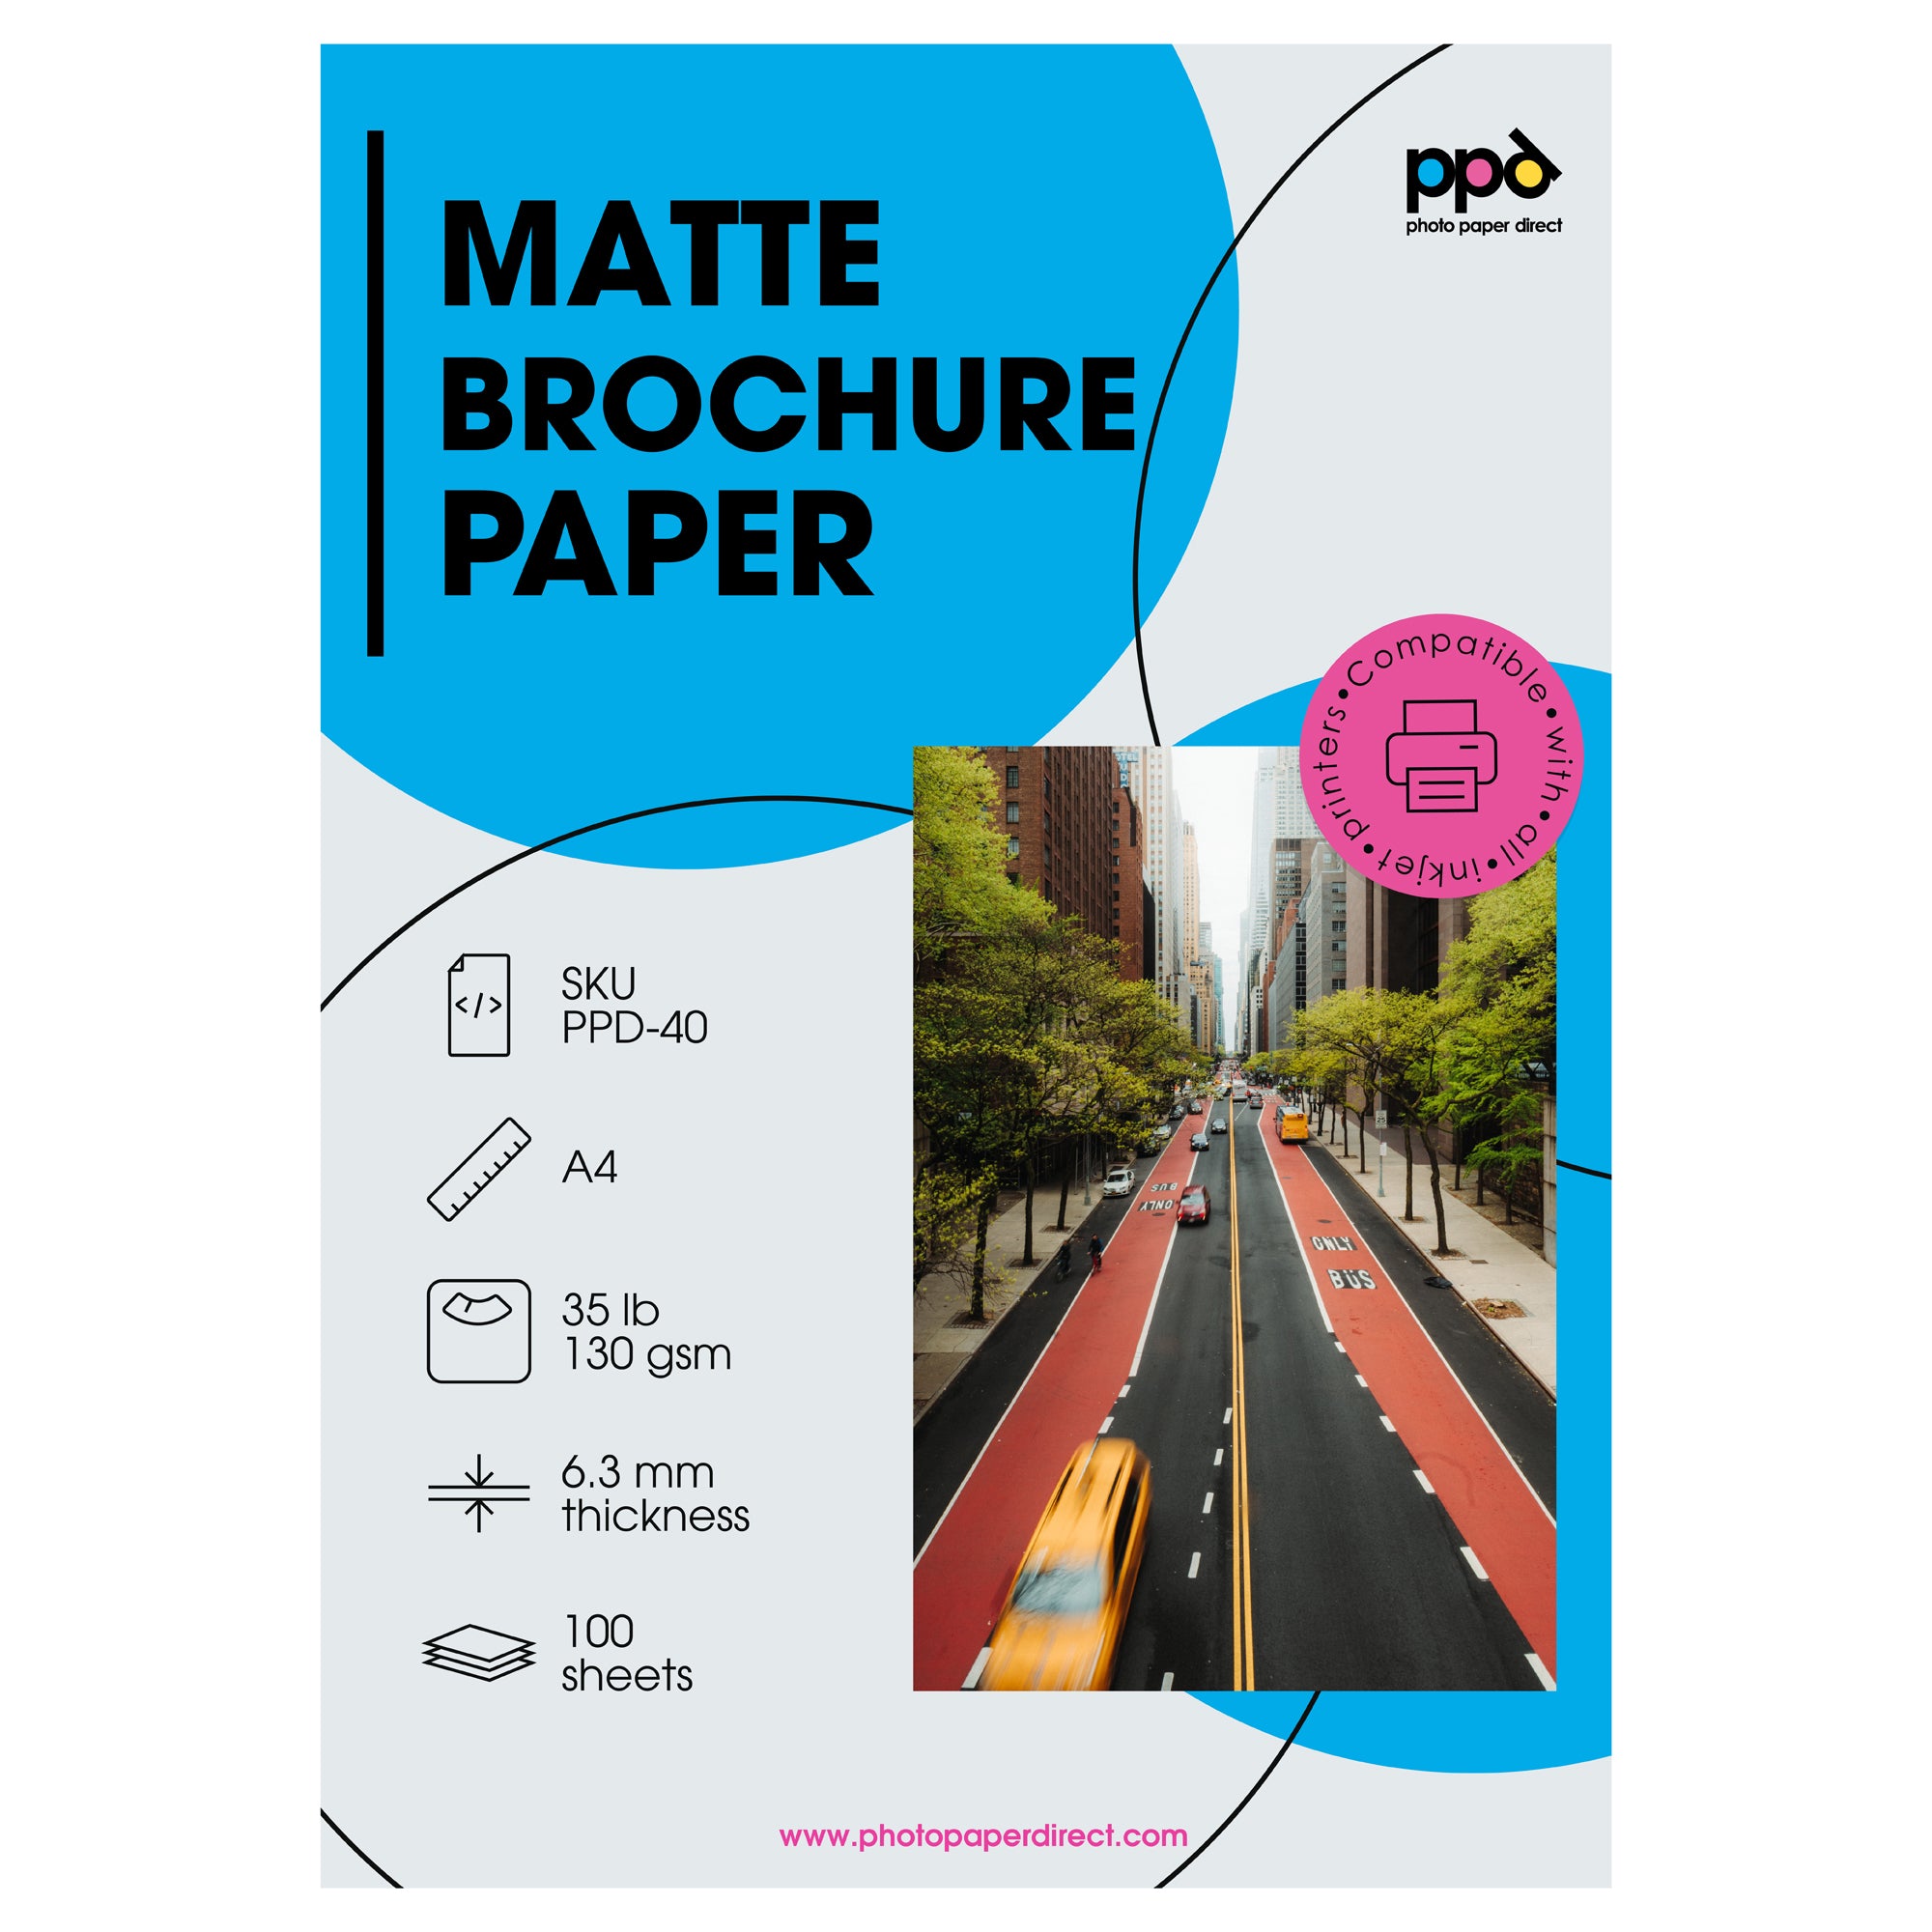 PPD Inkjet Brochure Paper Double Sided Smooth Matt Finish 35lb. 130gsm 6.3mil A4 PPD-40